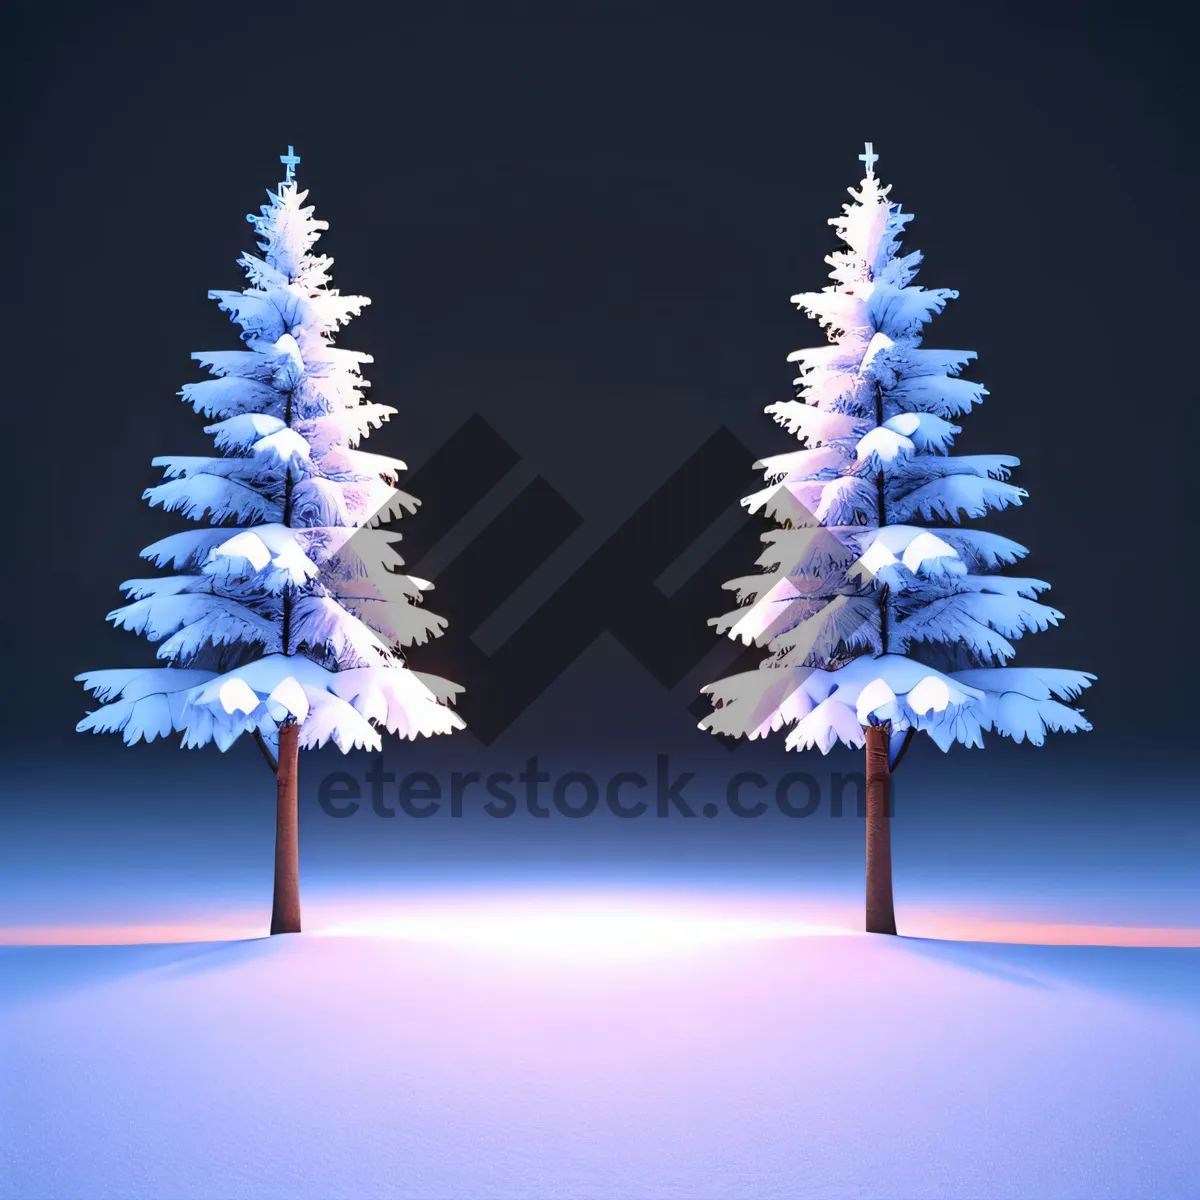 Picture of Festive Evergreen Glistening with Snow: Winter Holiday Tree